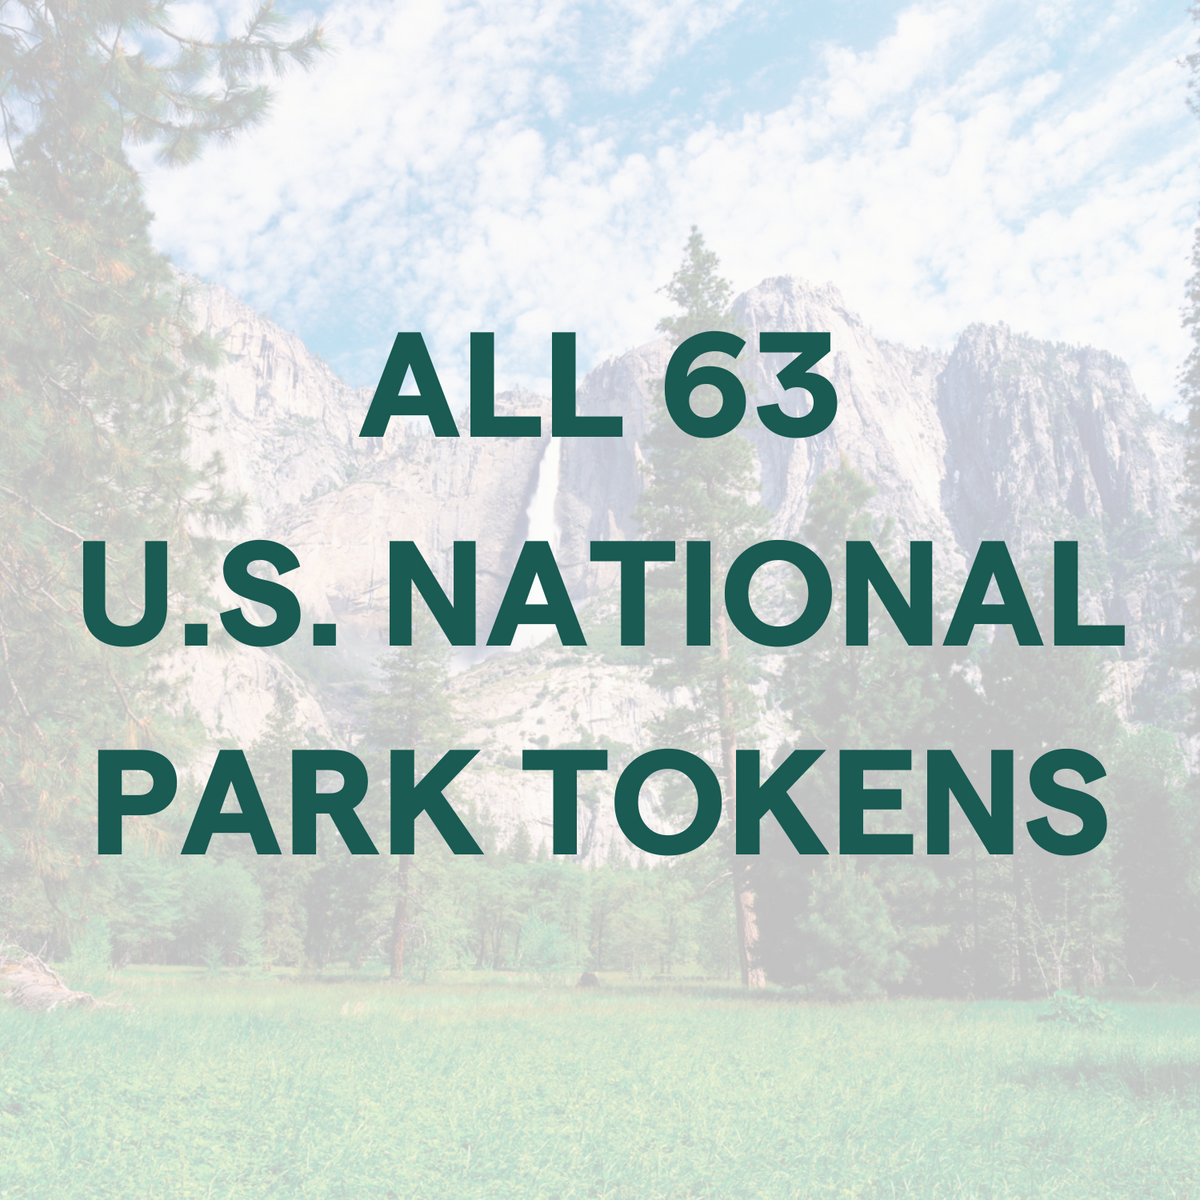 All 63 US National Park Tokens